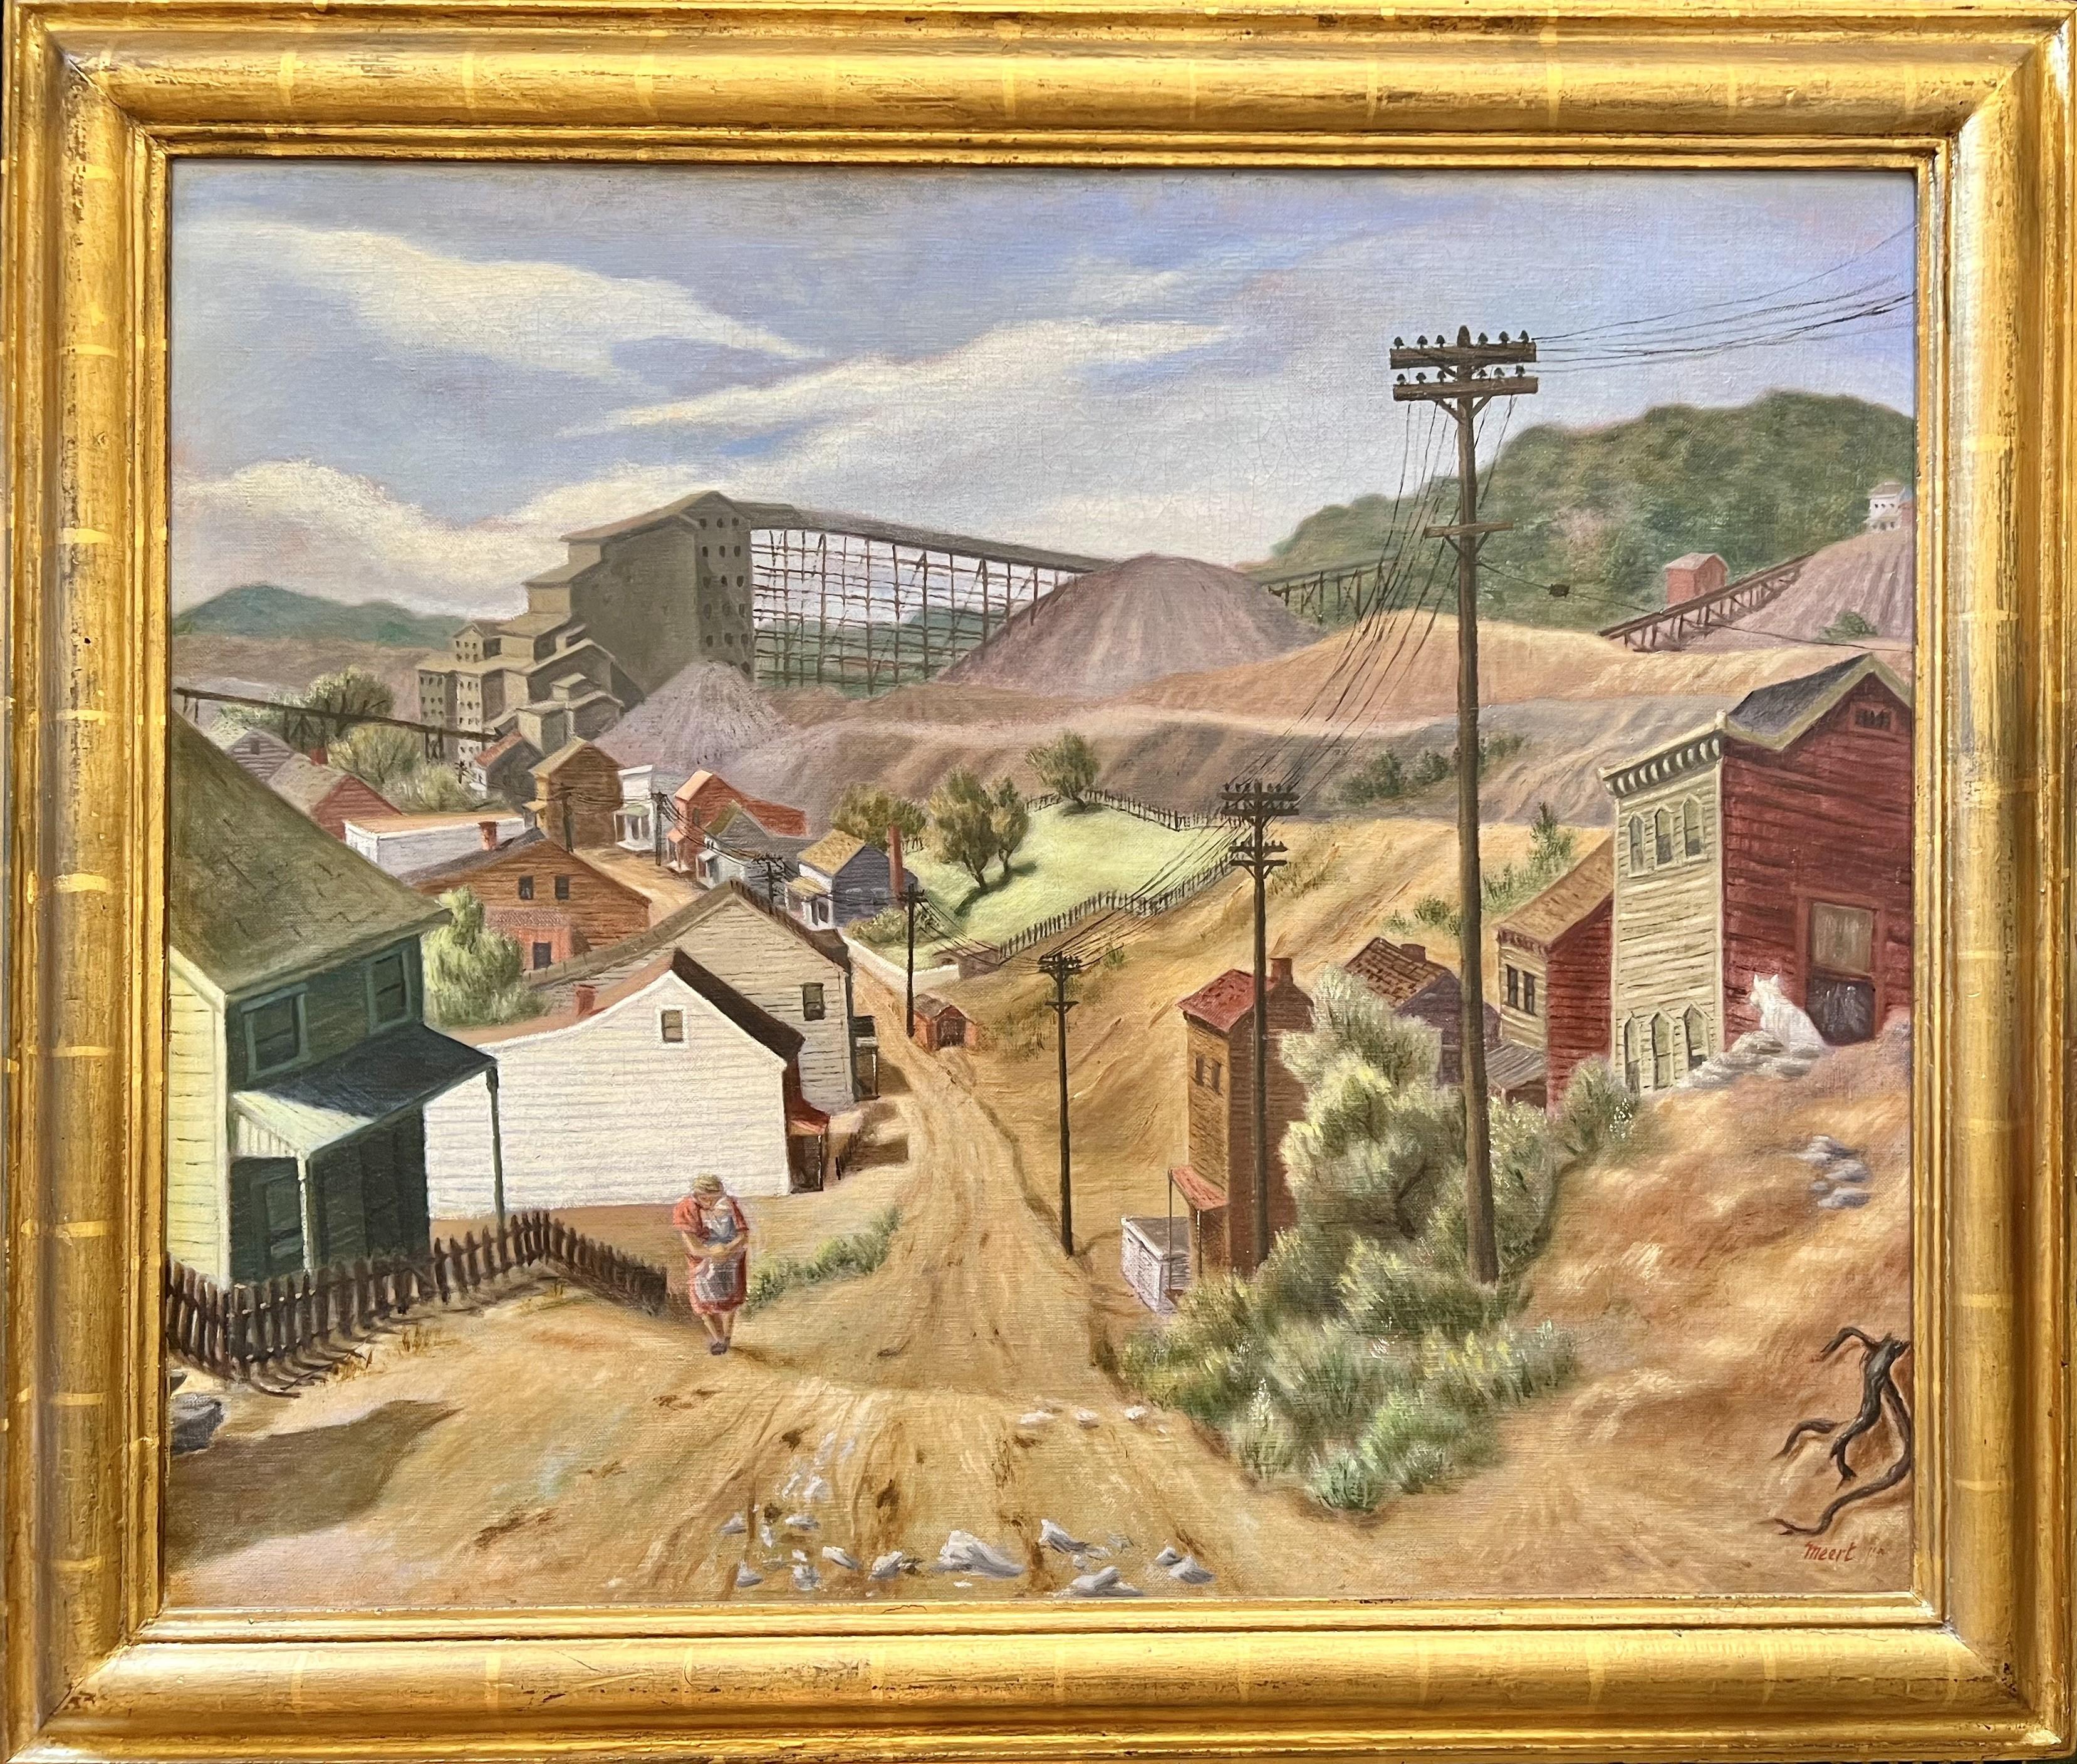 Gold Mine, Central City, Colorado - Painting by Joseph Meert